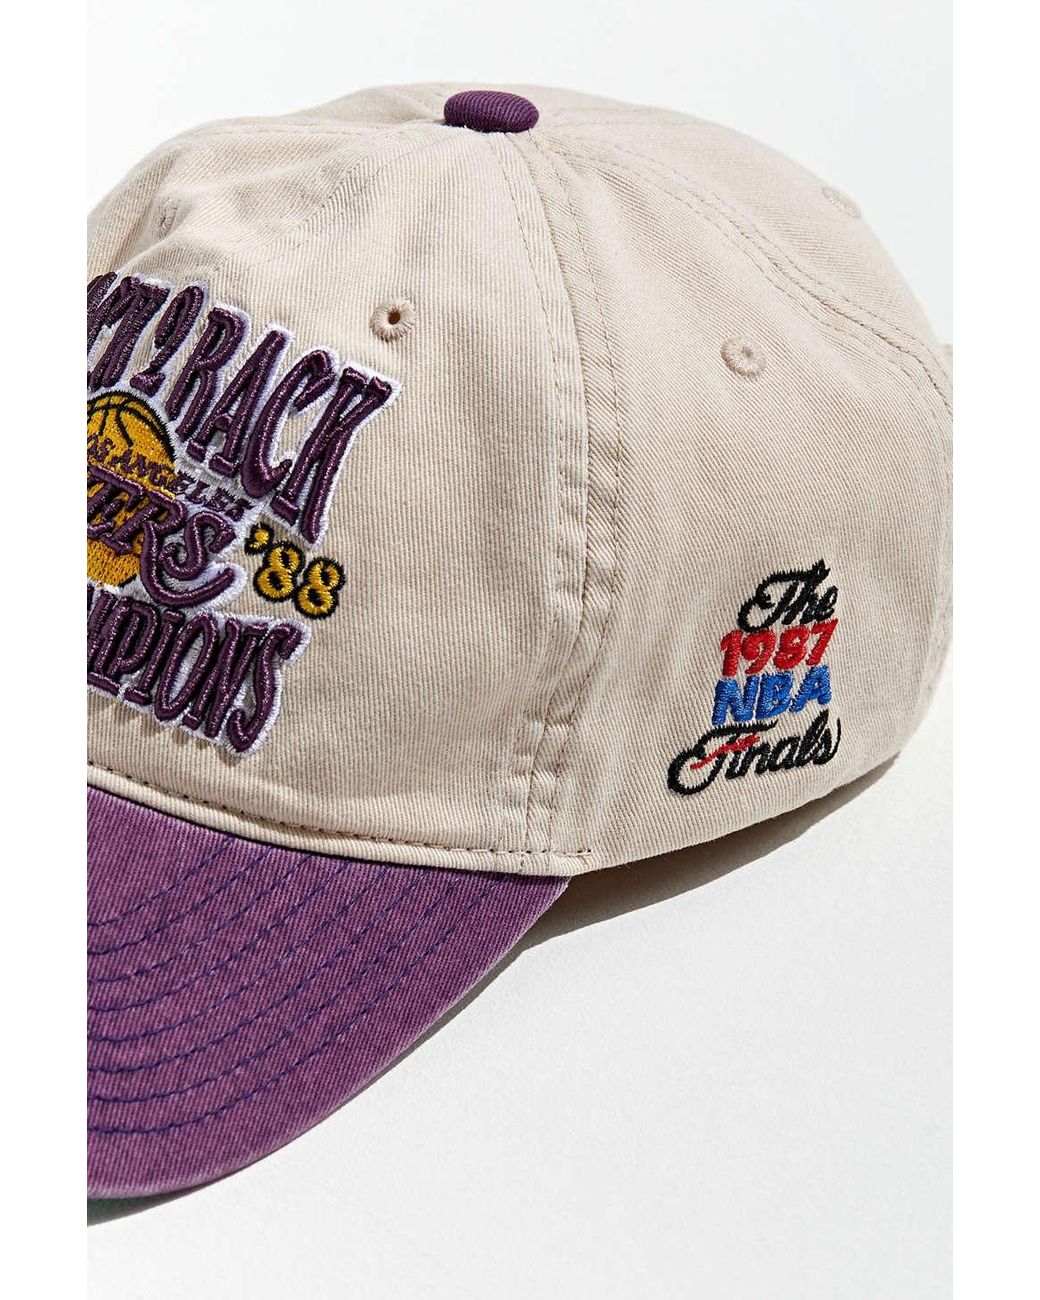 Mitchell & Ness Los Angeles Lakers Champ Patch HWC Adjustable Snapback  Hat Cap